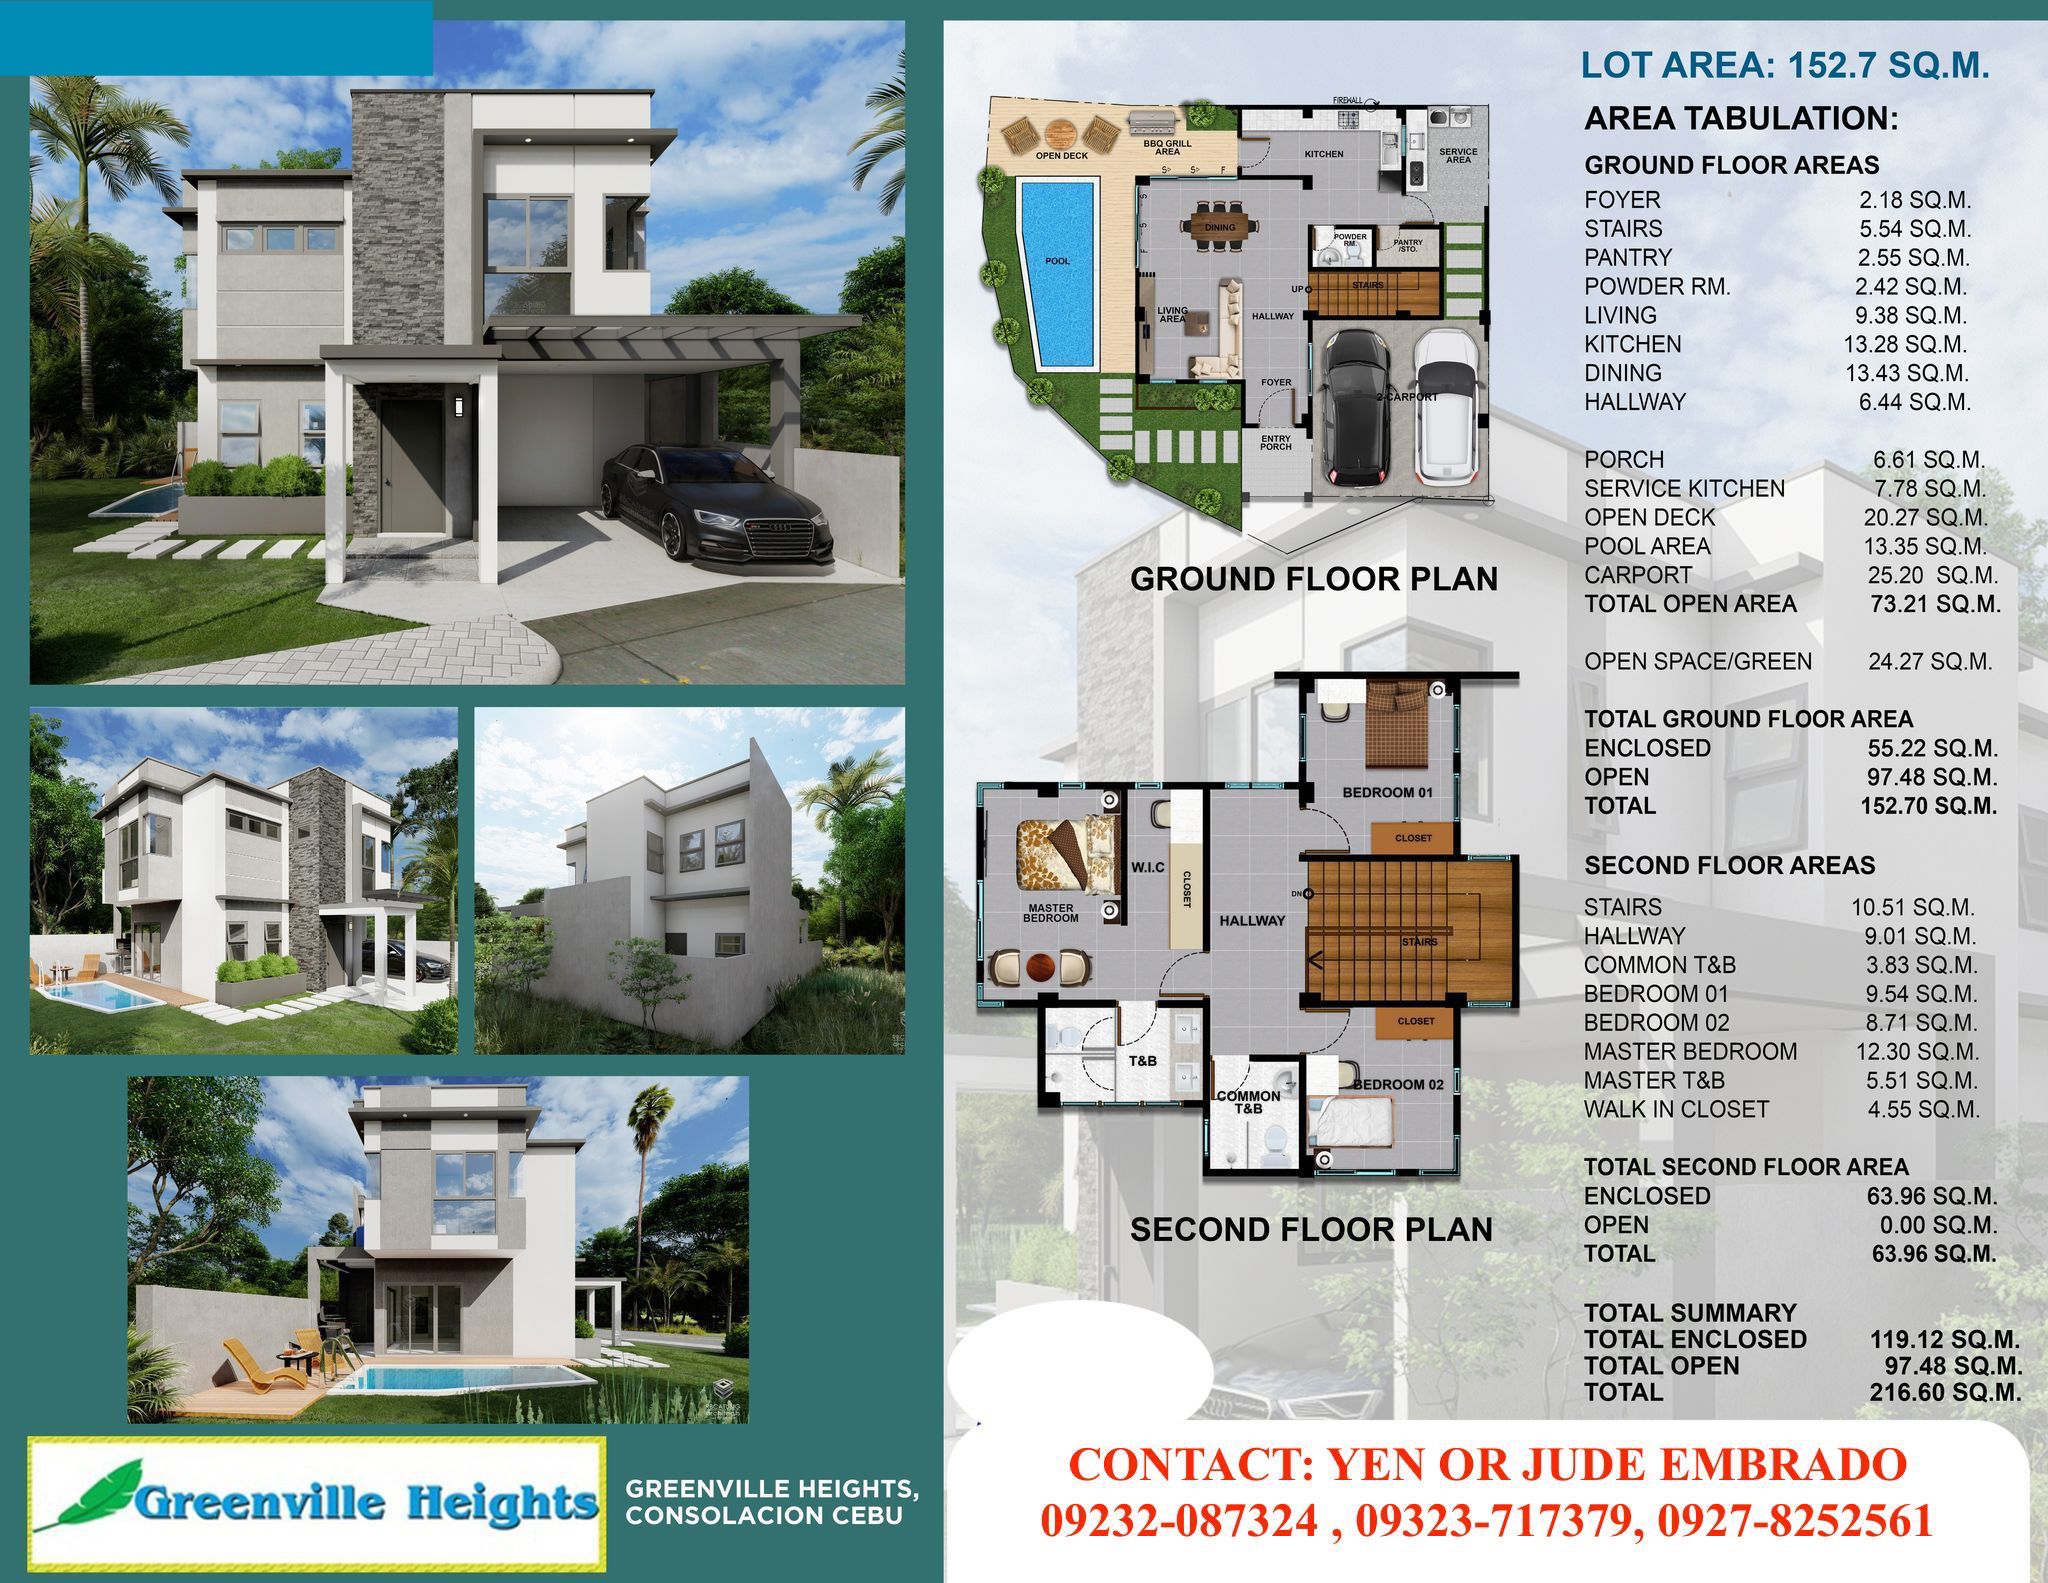 Greenville Heights Consolacion Cebu House For Sale with Pool (SOLD)